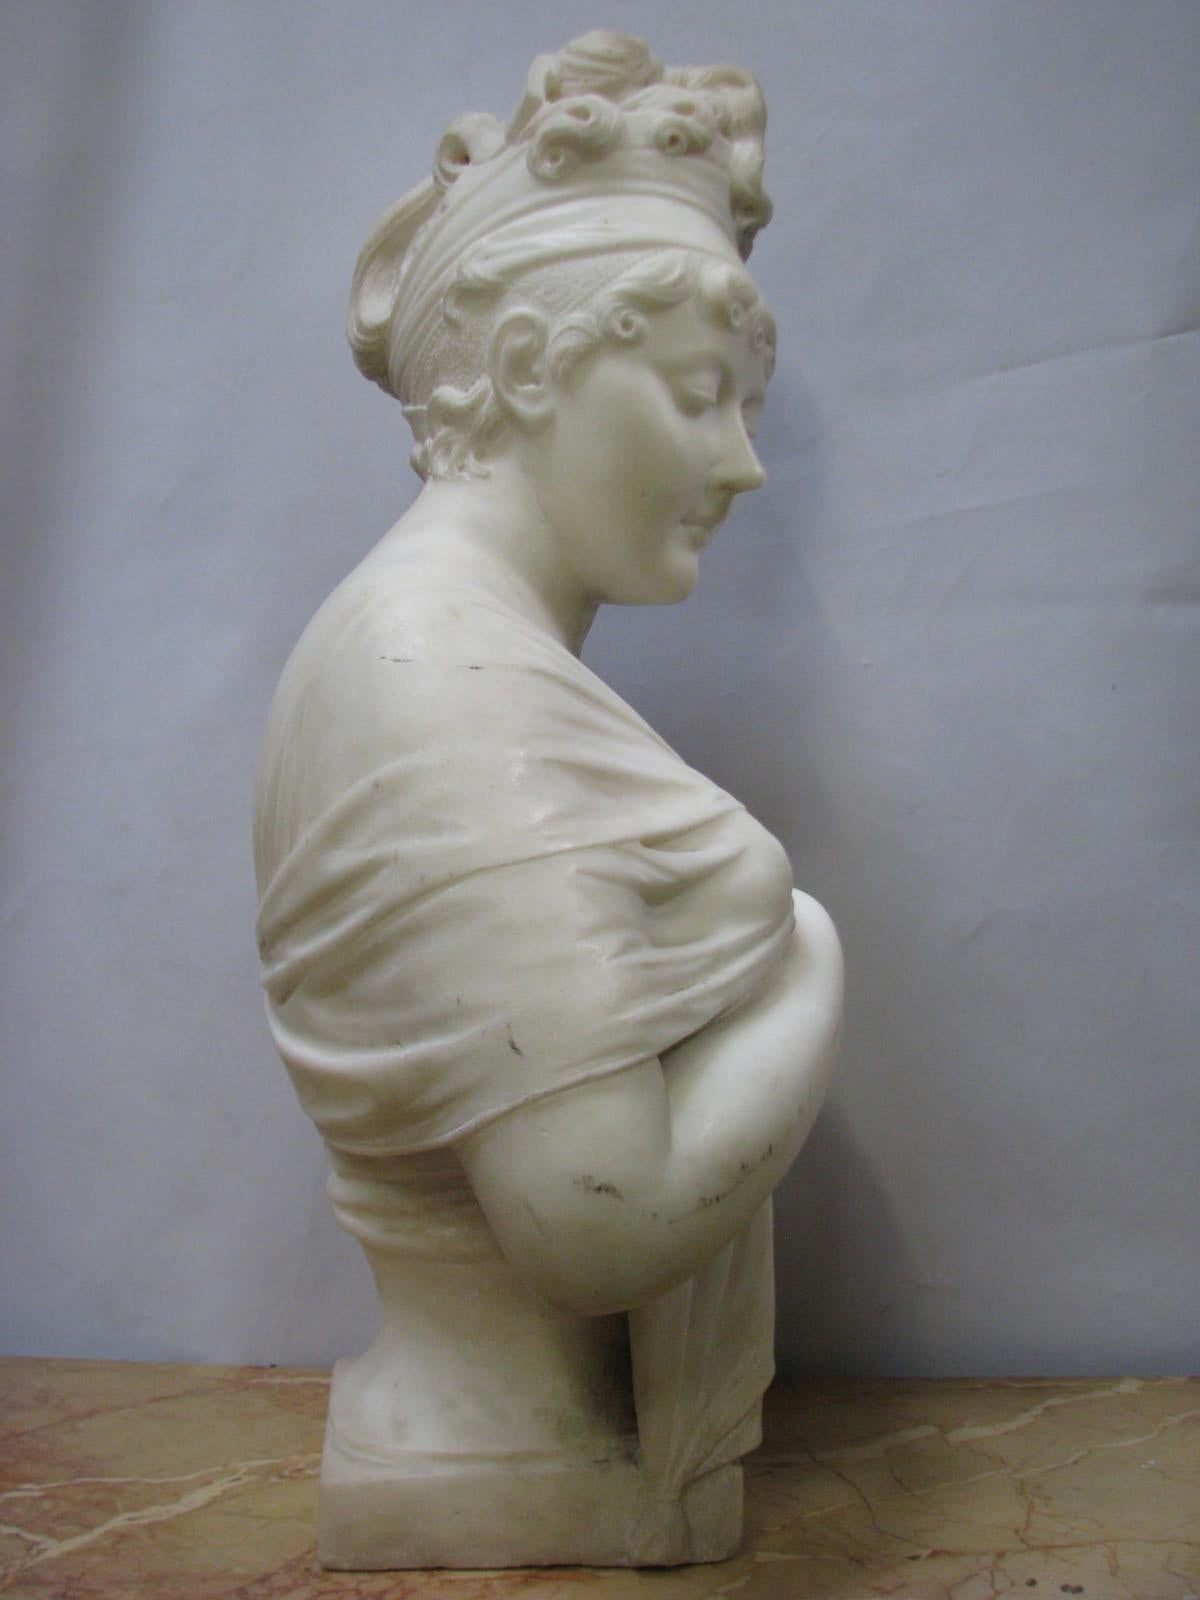 19th century marble sculpture busts of a young woman
Over half a meter high,
marble, unsigned sculpture,
showing the bust of a young woman.
 
Visually graceful sculpture, kept in the classical canon.
Outstanding artistically - perfect